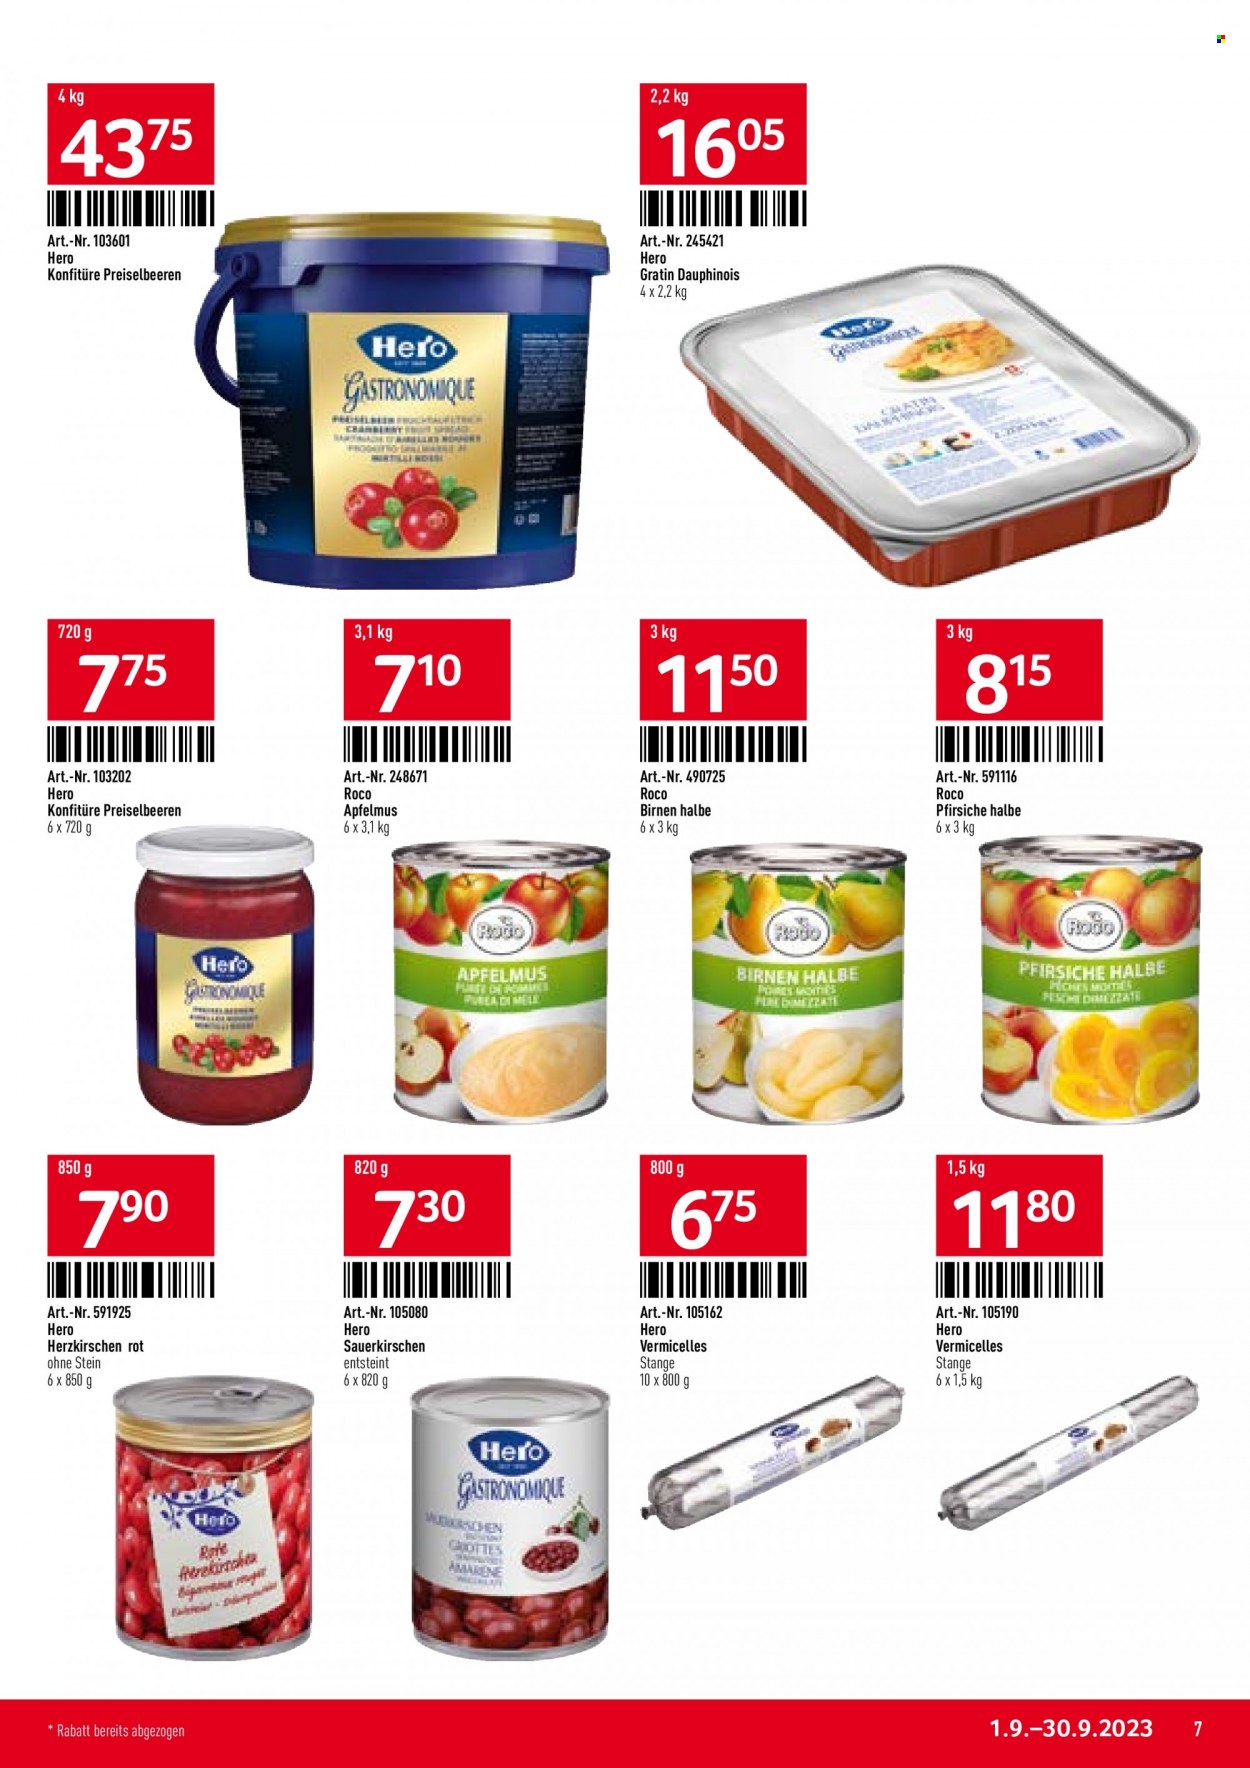 Catalogue TransGourmet - 1.9.2023 - 30.9.2023. Page 7.